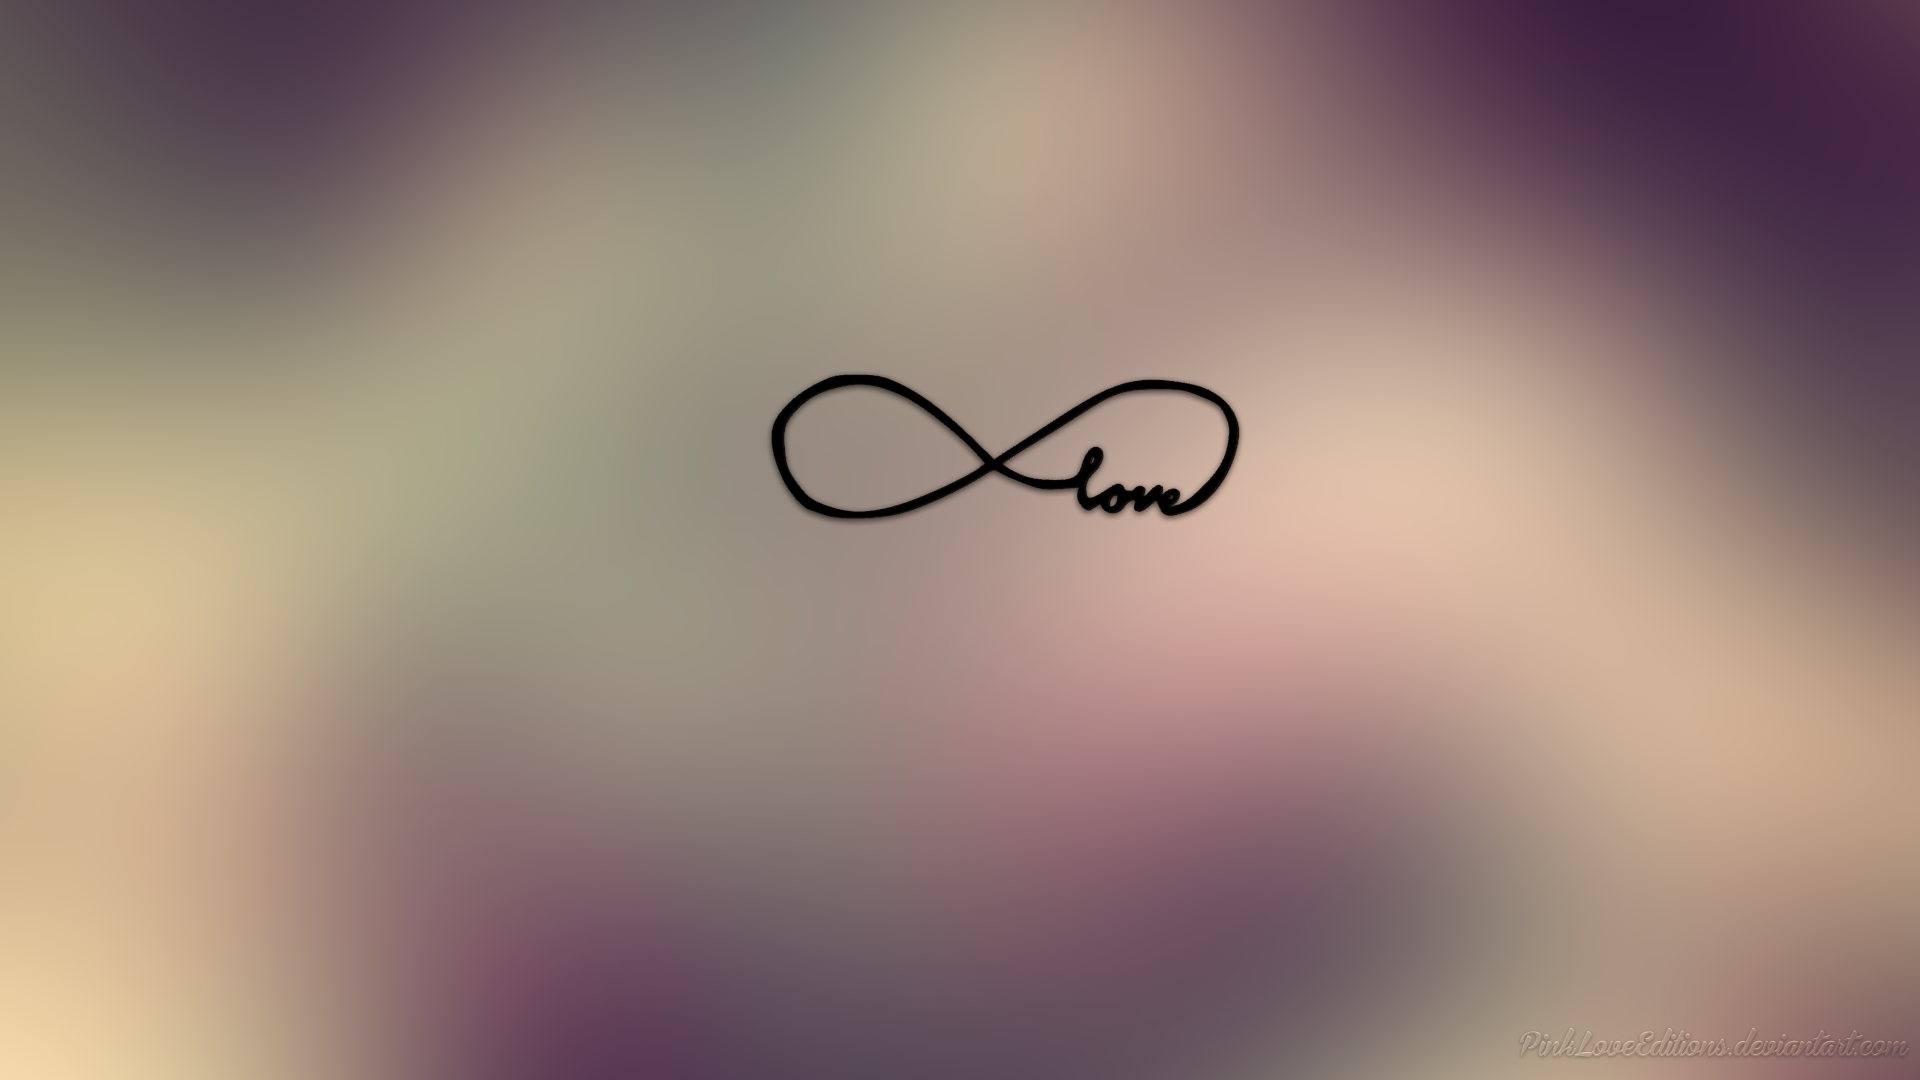 Infinite Wallpaper By Pinkloveeditions